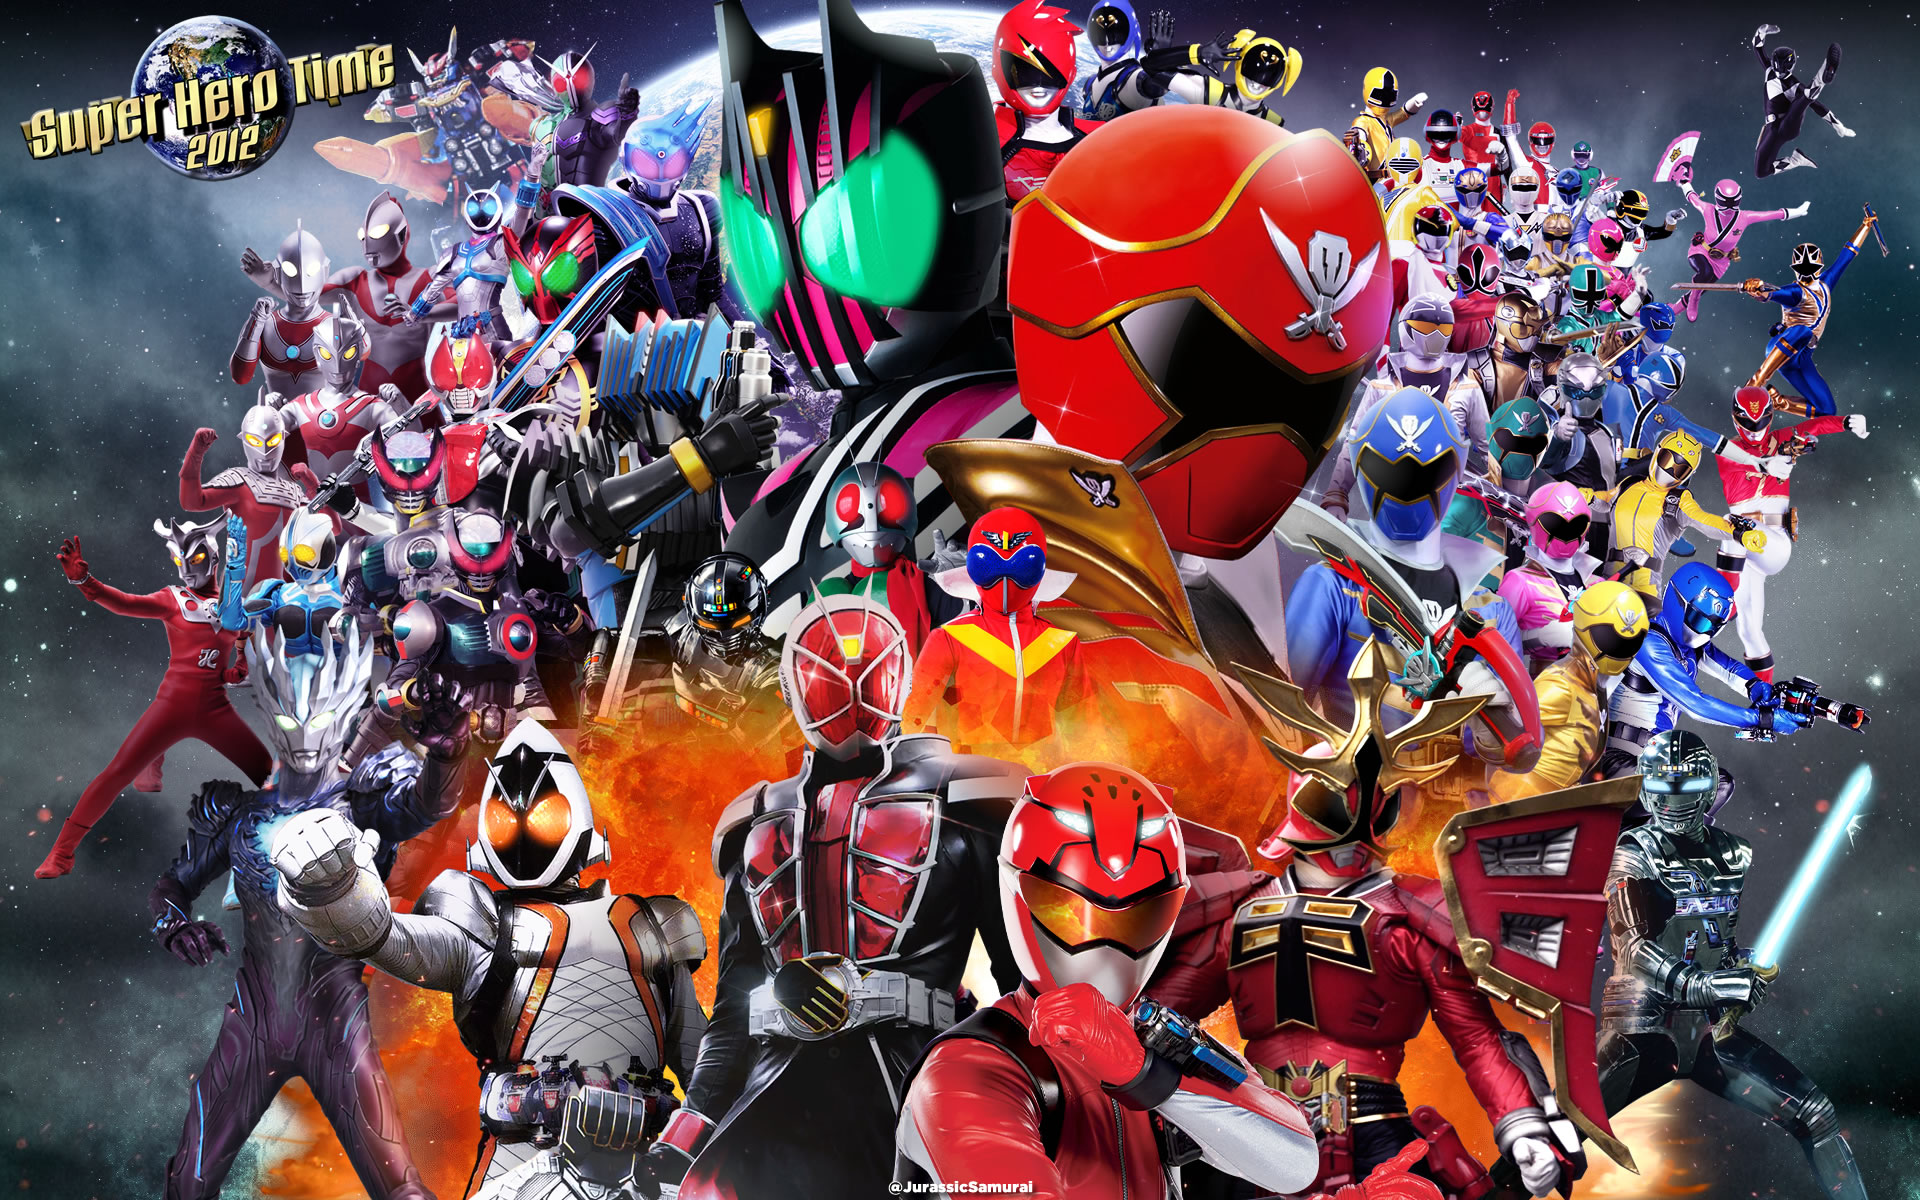 Twitter 上的 Jurassicsamurai Super Hero Time 12 Almost 10 Years After I Don T Think There Will Ever Be A Definitive Version Of The 12 Wallpaper But It S Always Fun To Remake 仮面ライダーウィザード 特命戦隊ゴーバスターズ